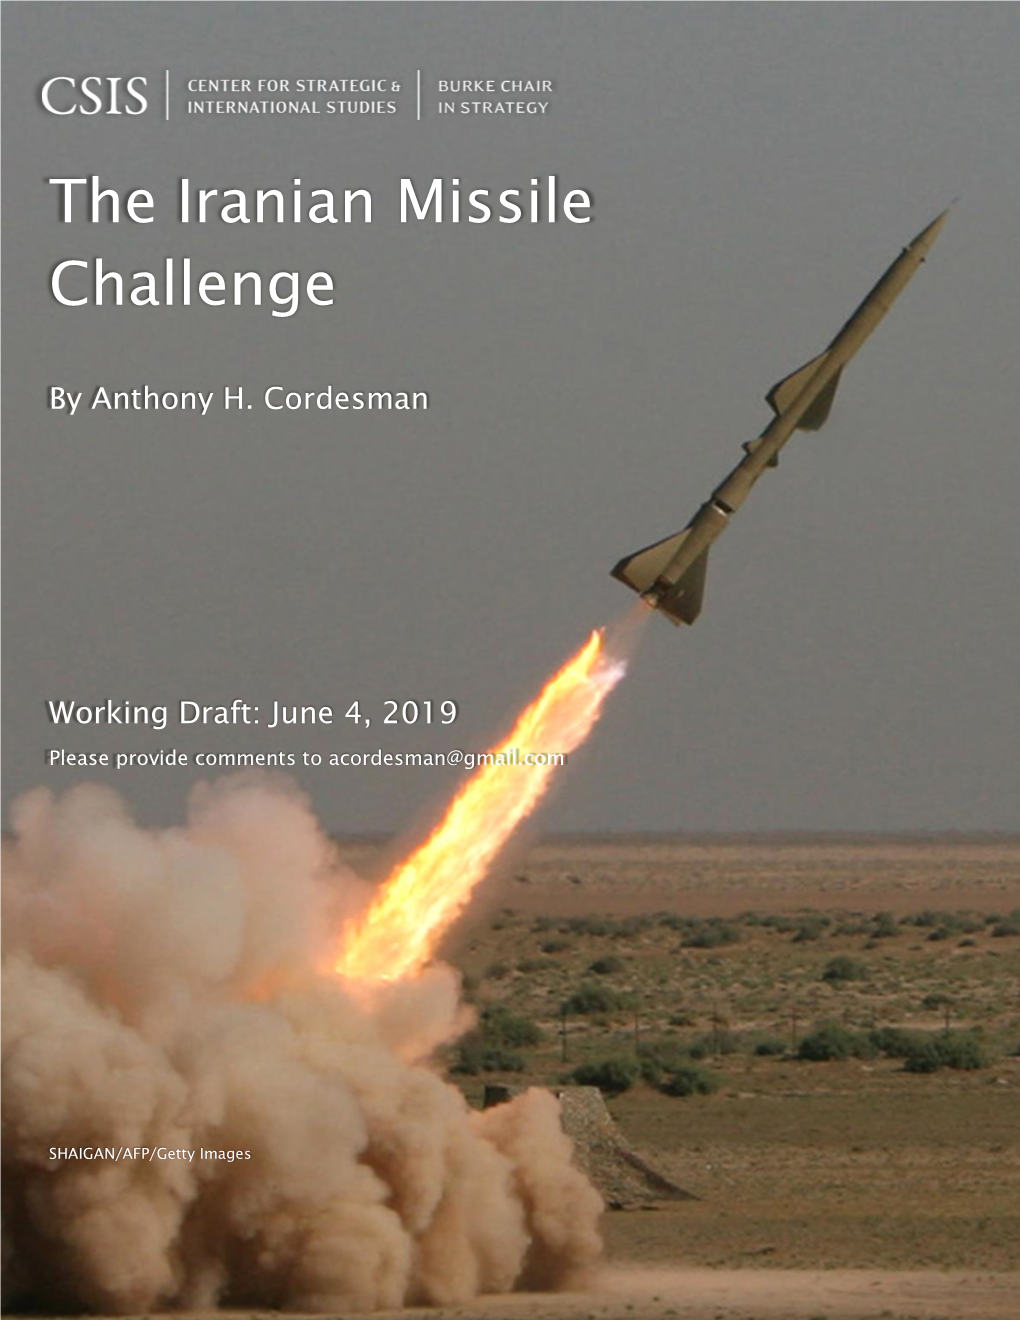 The Iranian Missile Challenge